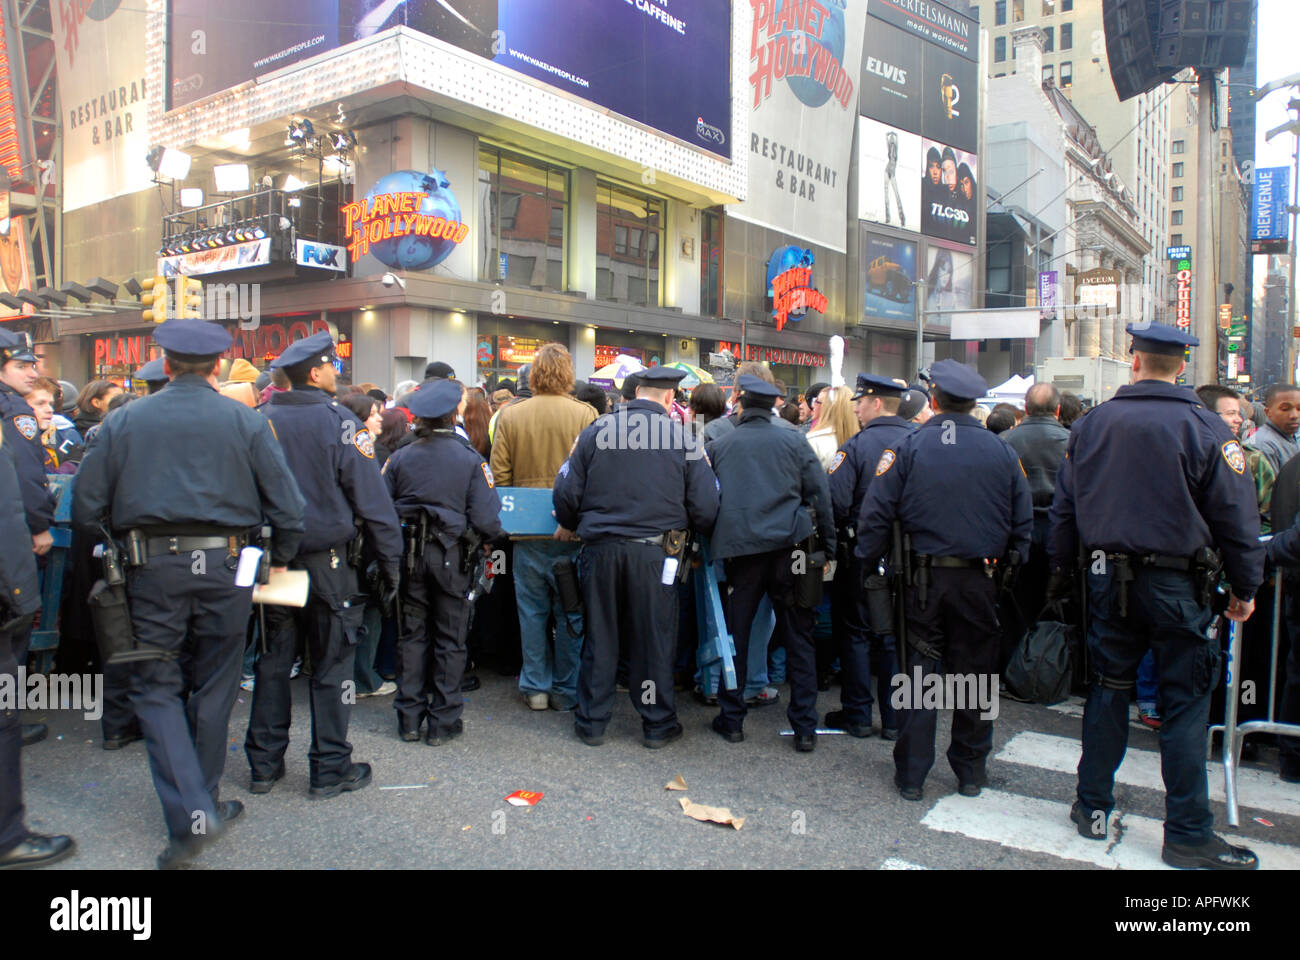 NYPD officers exercise crowd control in Times Square on New Year s Eve going into 2008 Stock Photo